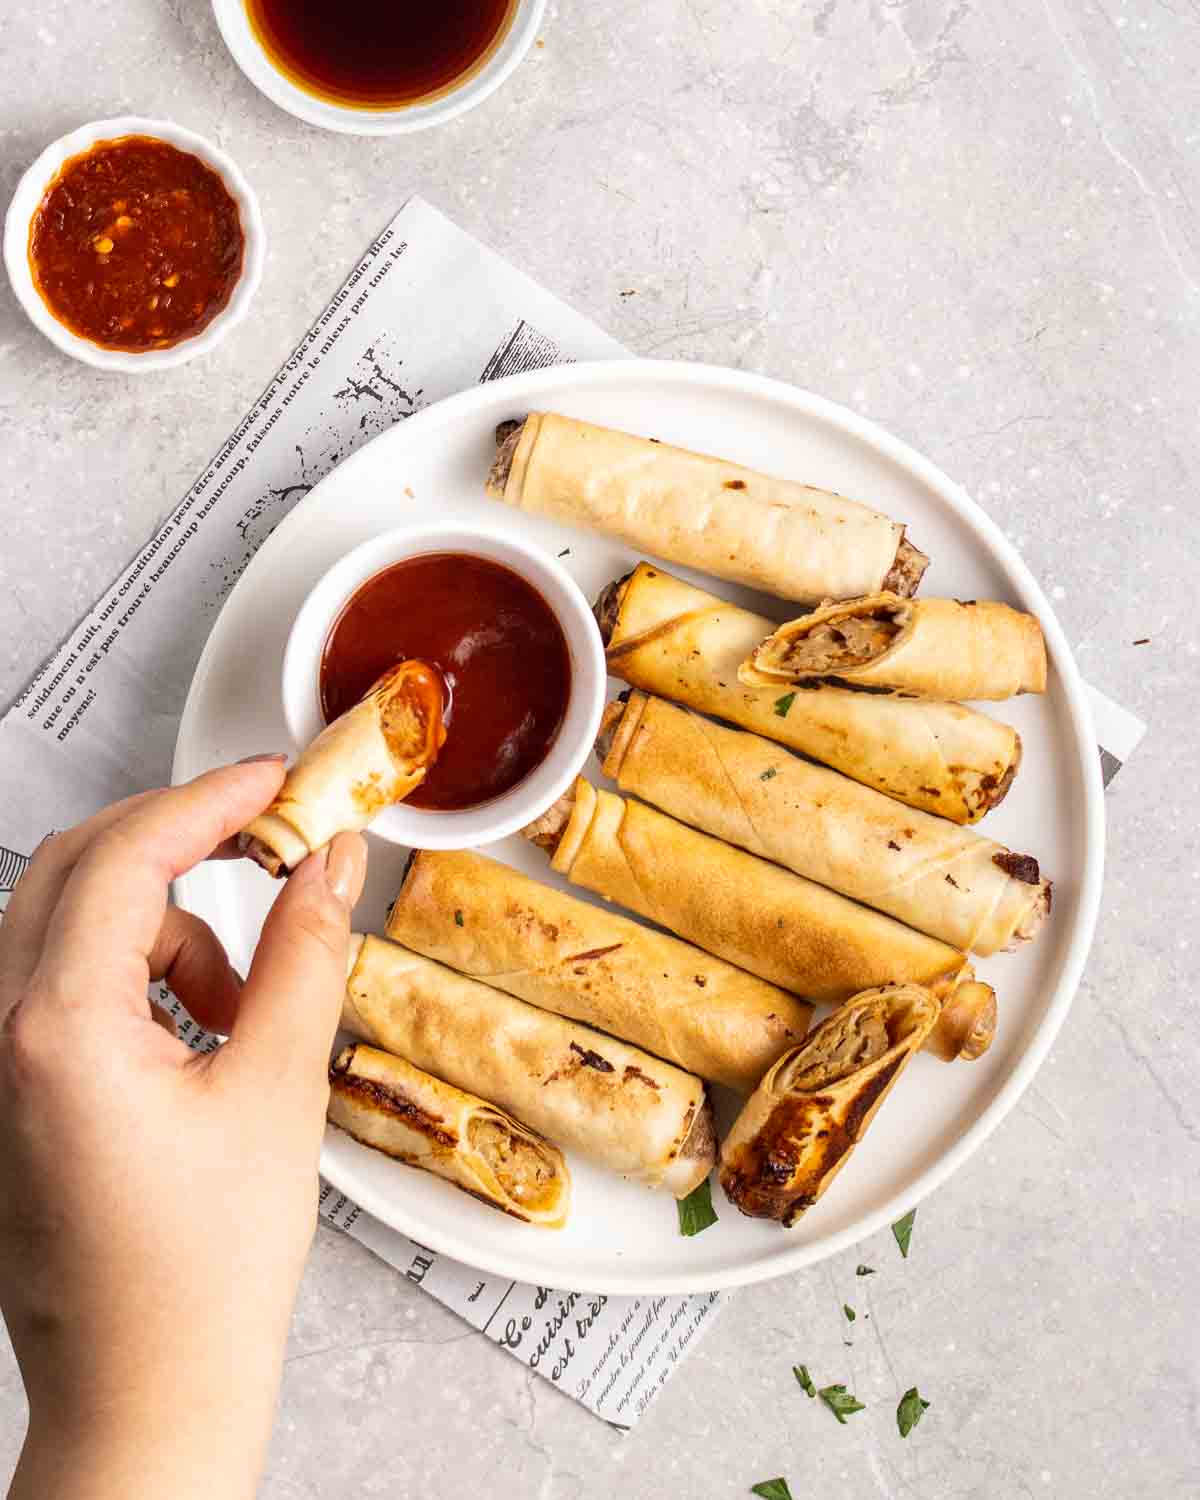 Air fryer vegan shanghai lumpia for awesome air fryer appetizers.